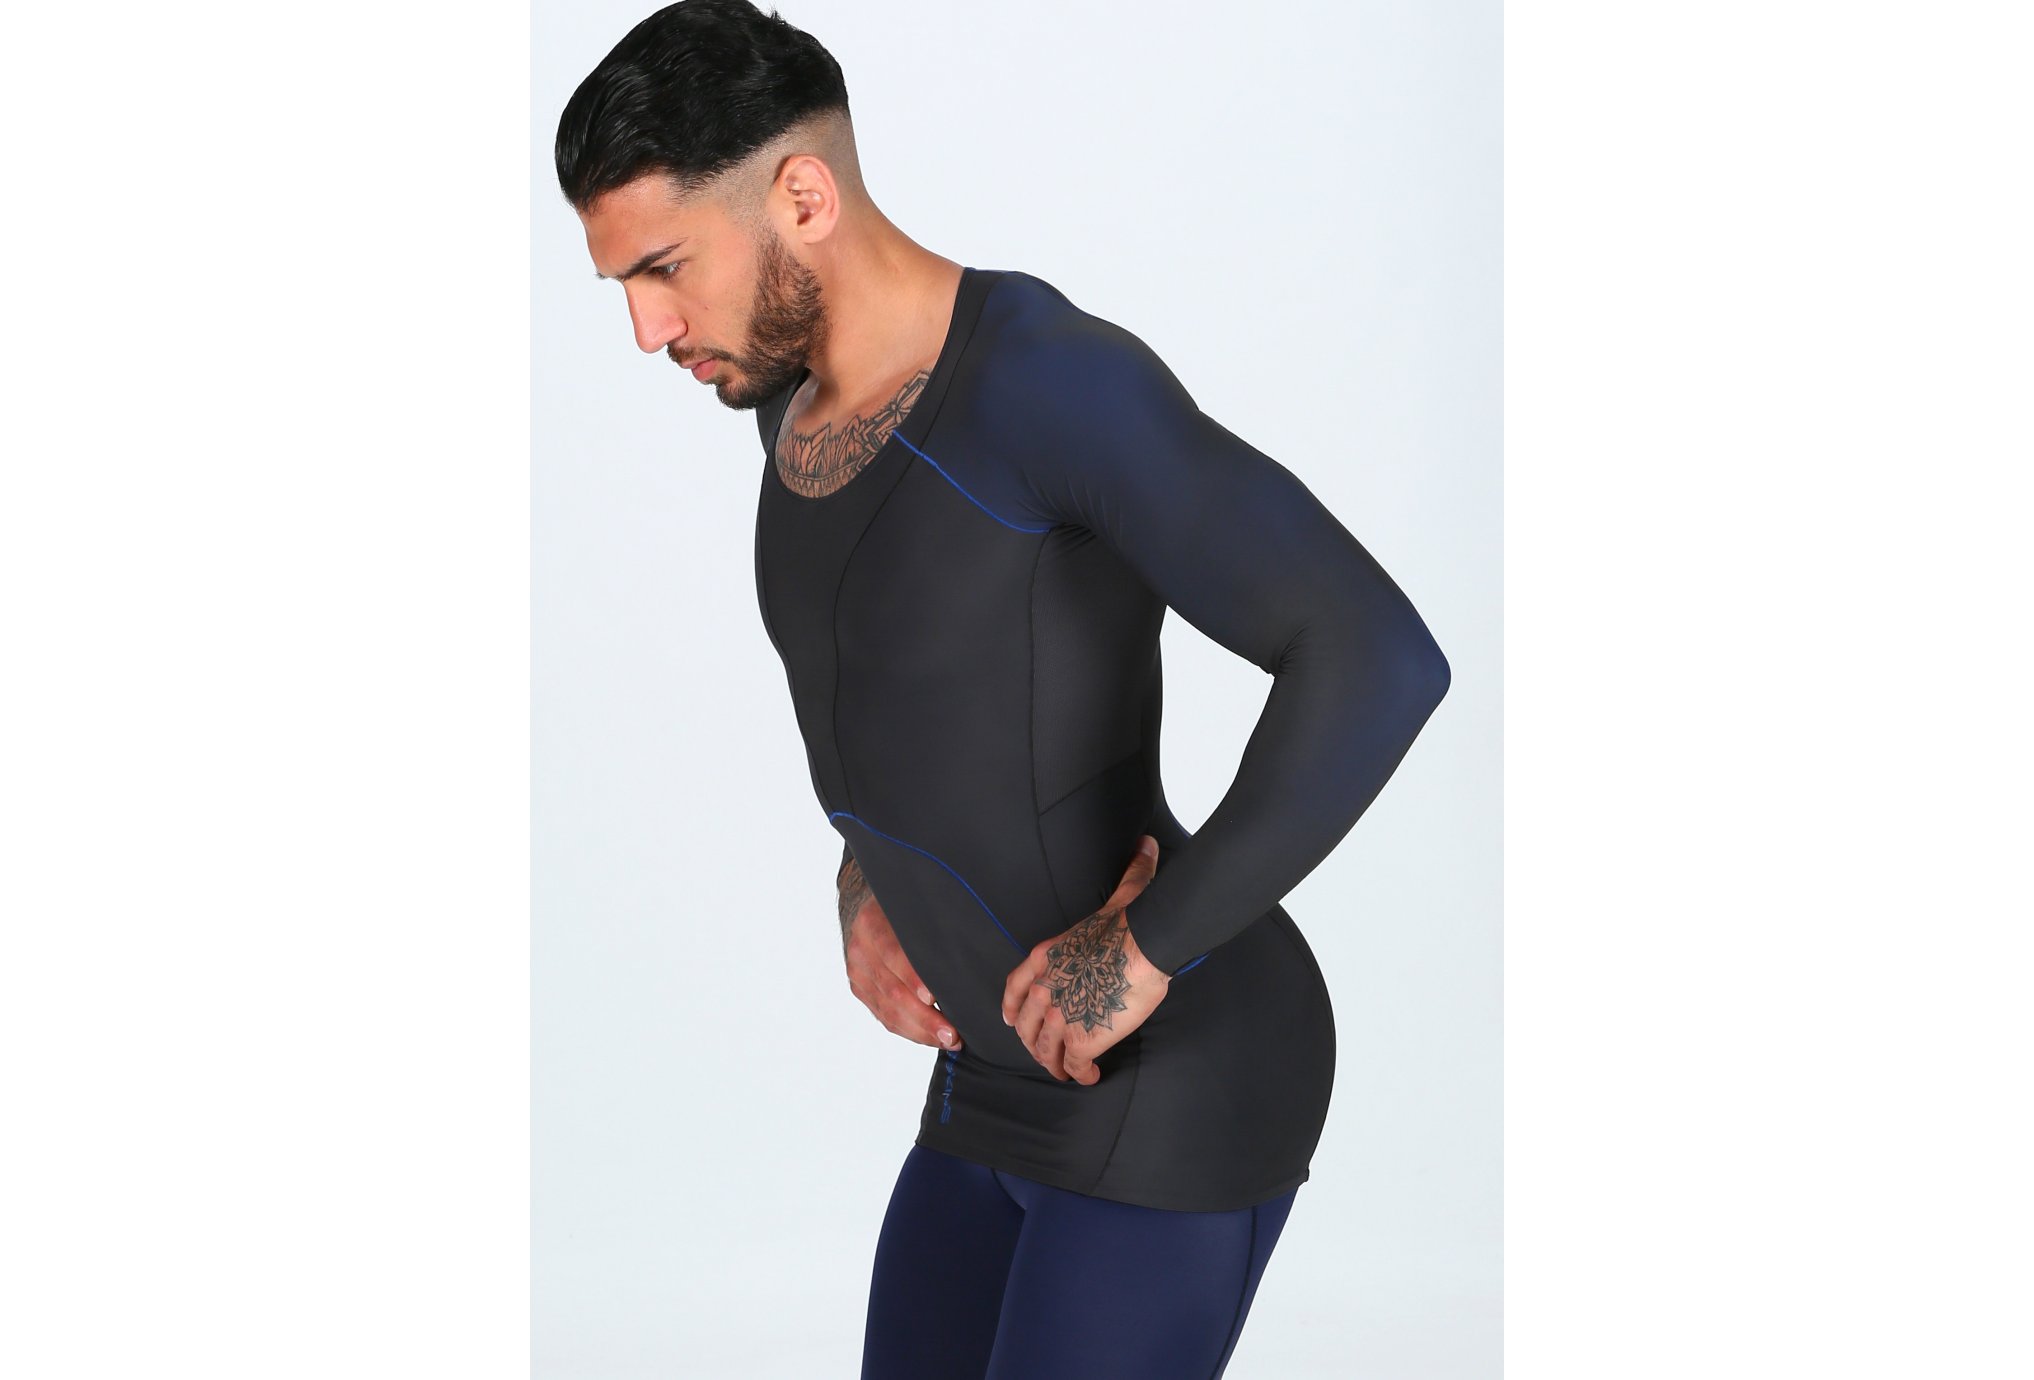 Skins Recovery RY400 M vêtement running homme déstockage